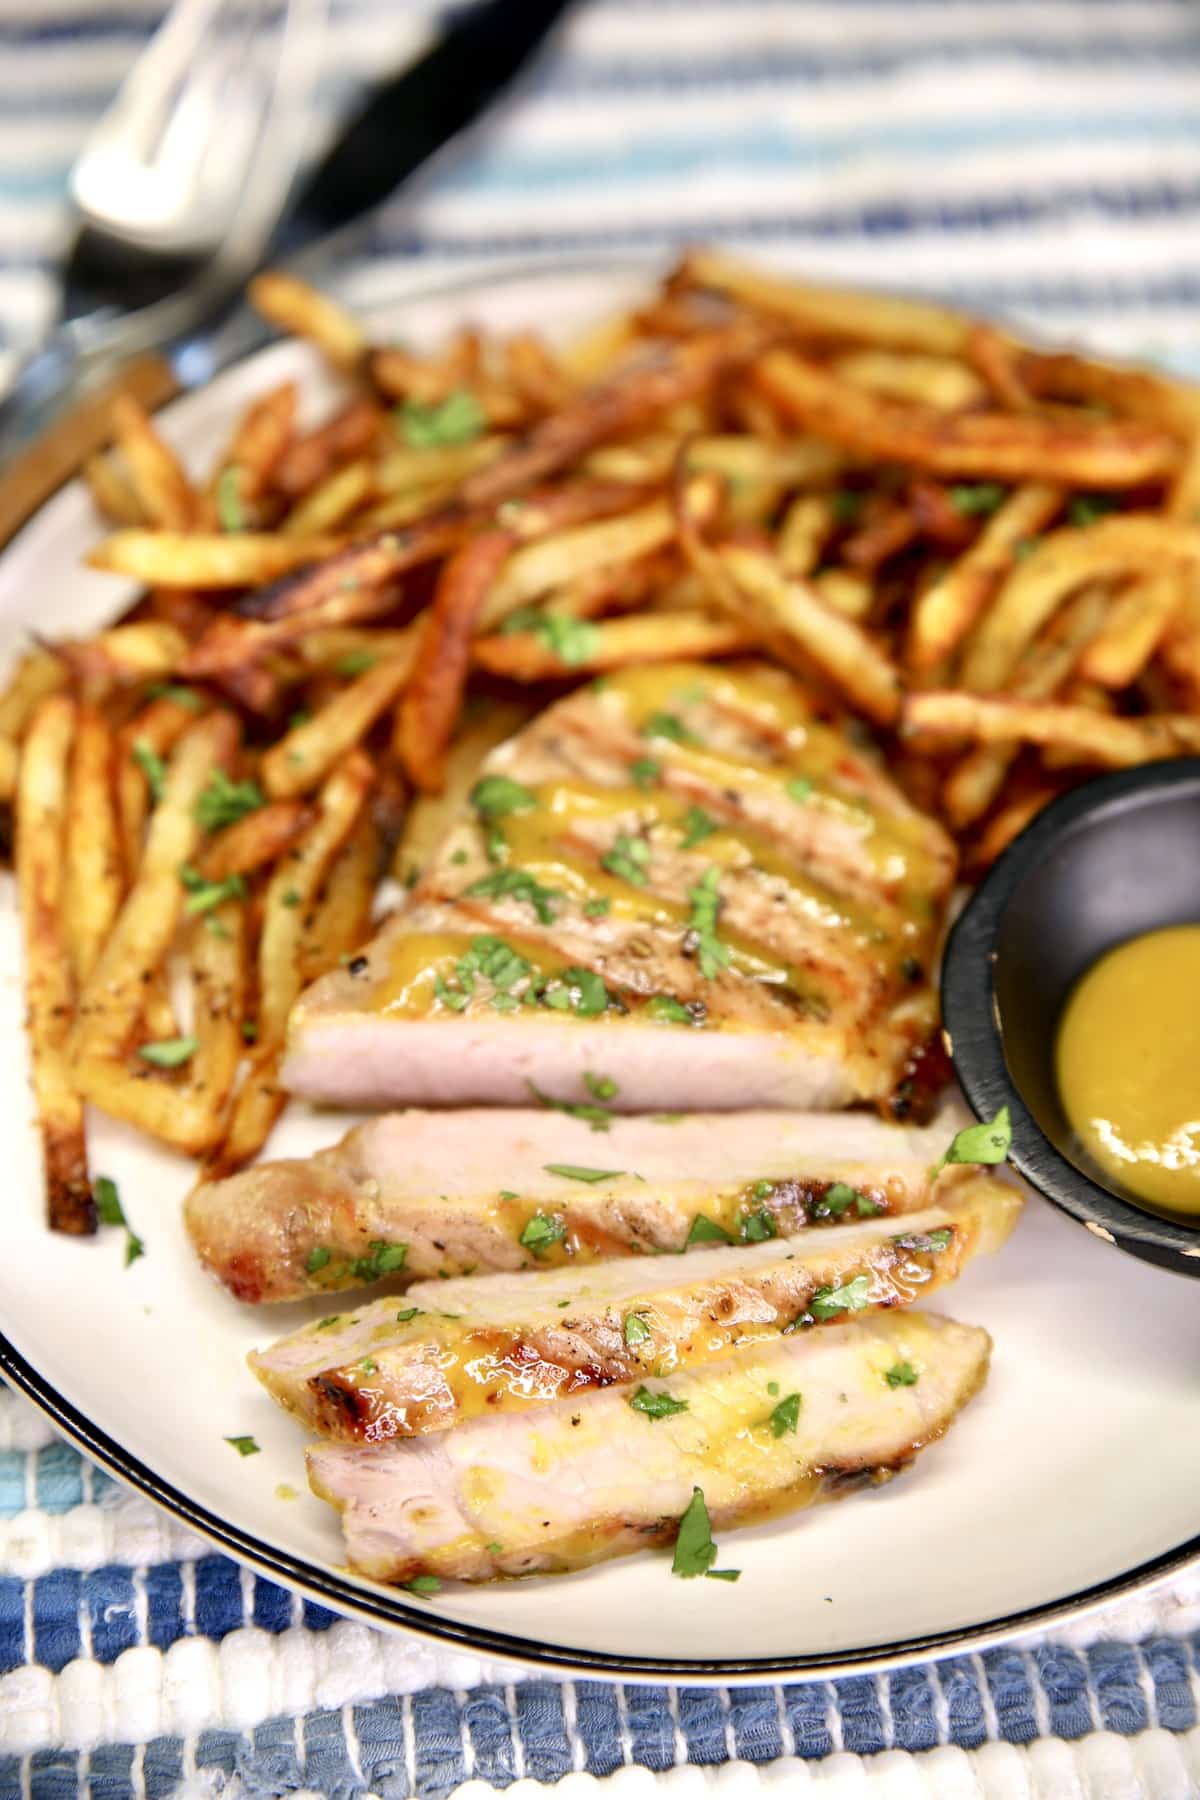 Sliced pork chop on a plate with fries.